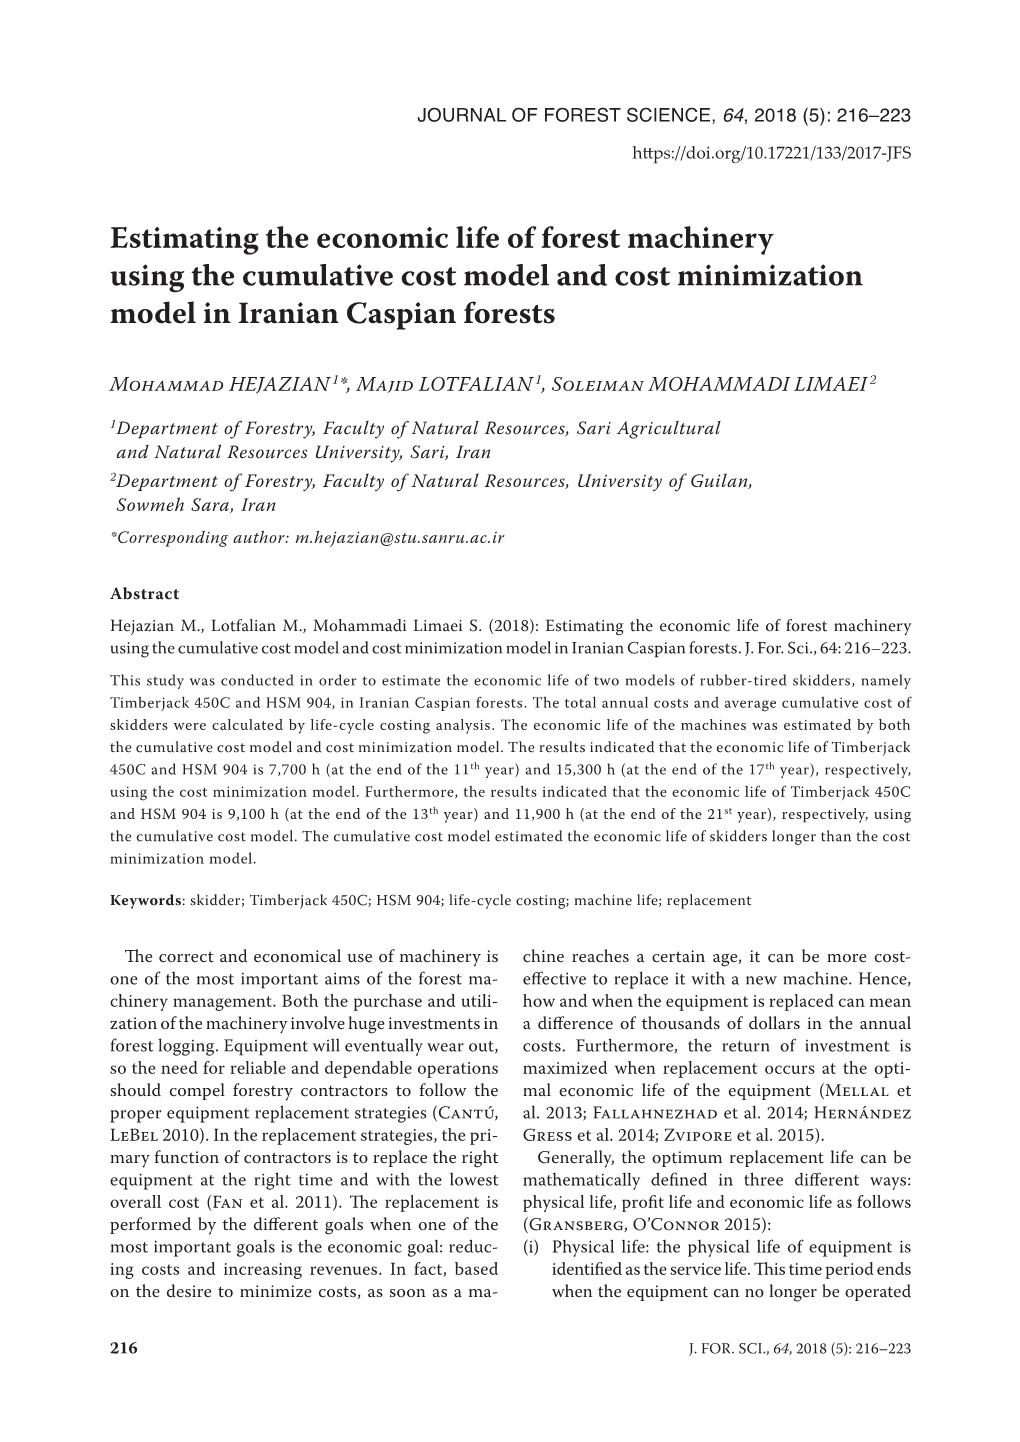 Estimating the Economic Life of Forest Machinery Using the Cumulative Cost Model and Cost Minimization Model in Iranian Caspian Forests